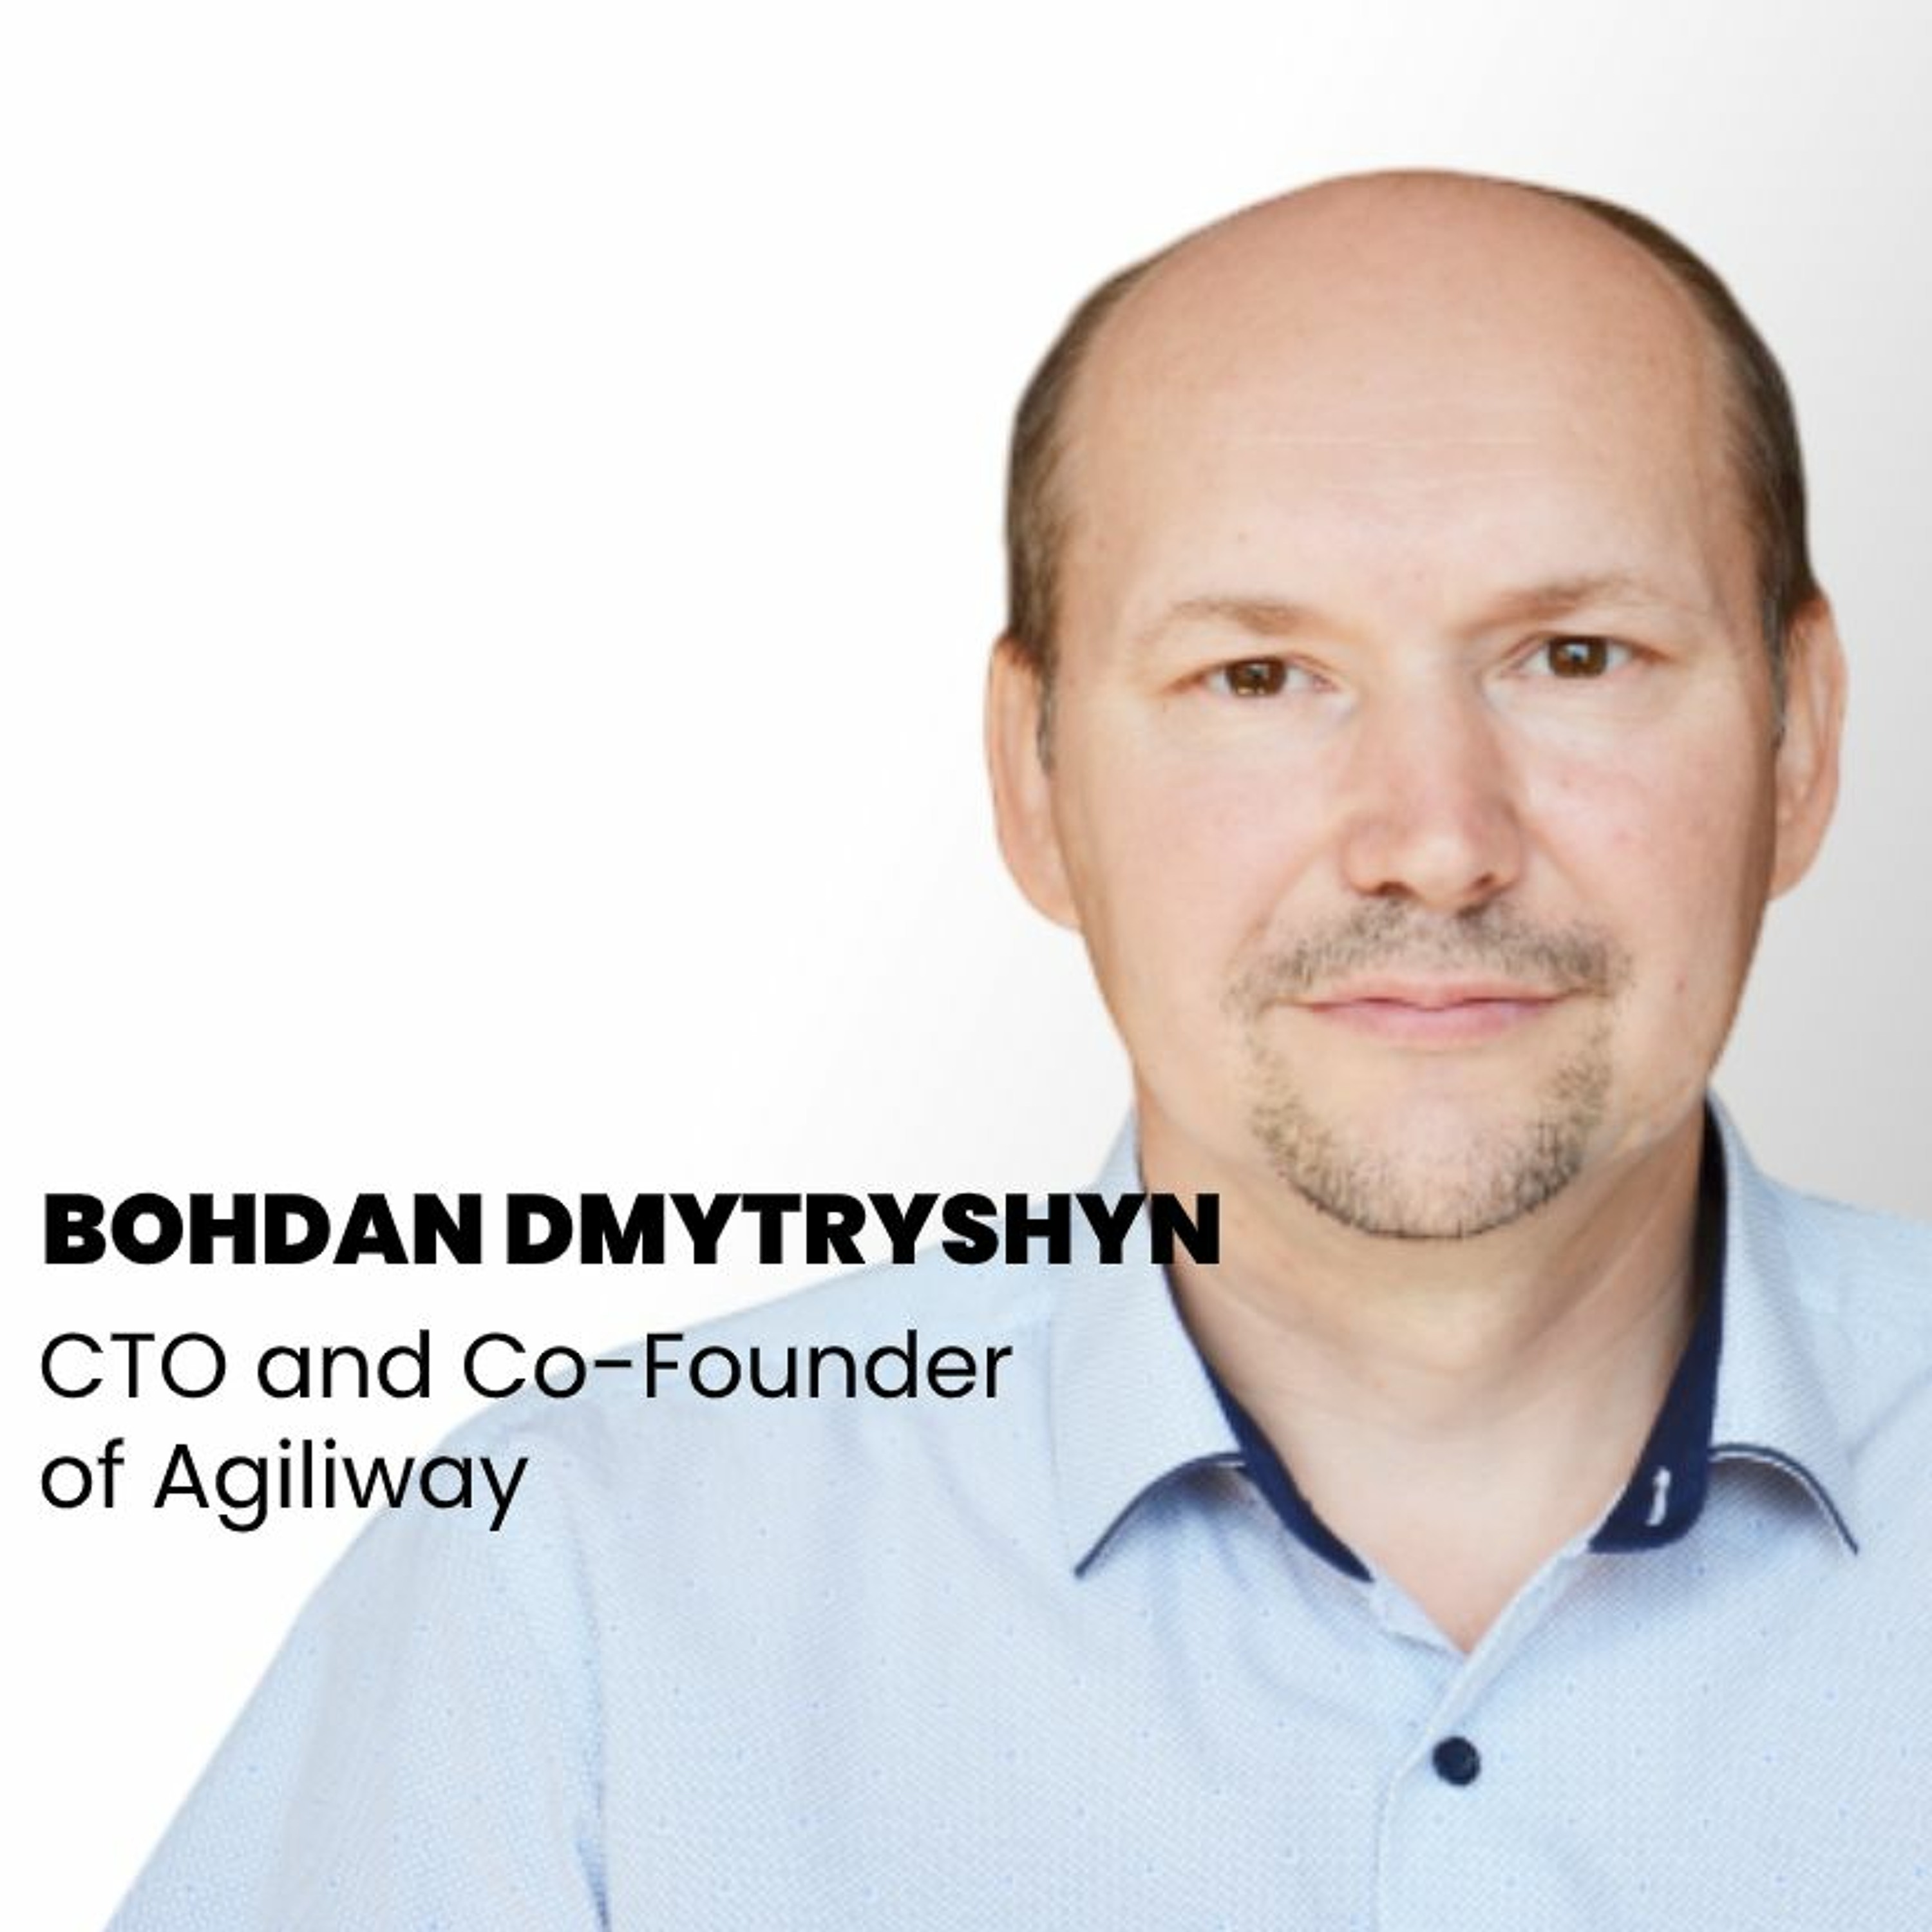 2. About the most important things for innovation and CTO role in IT - with Bohdan Dmytryshyn